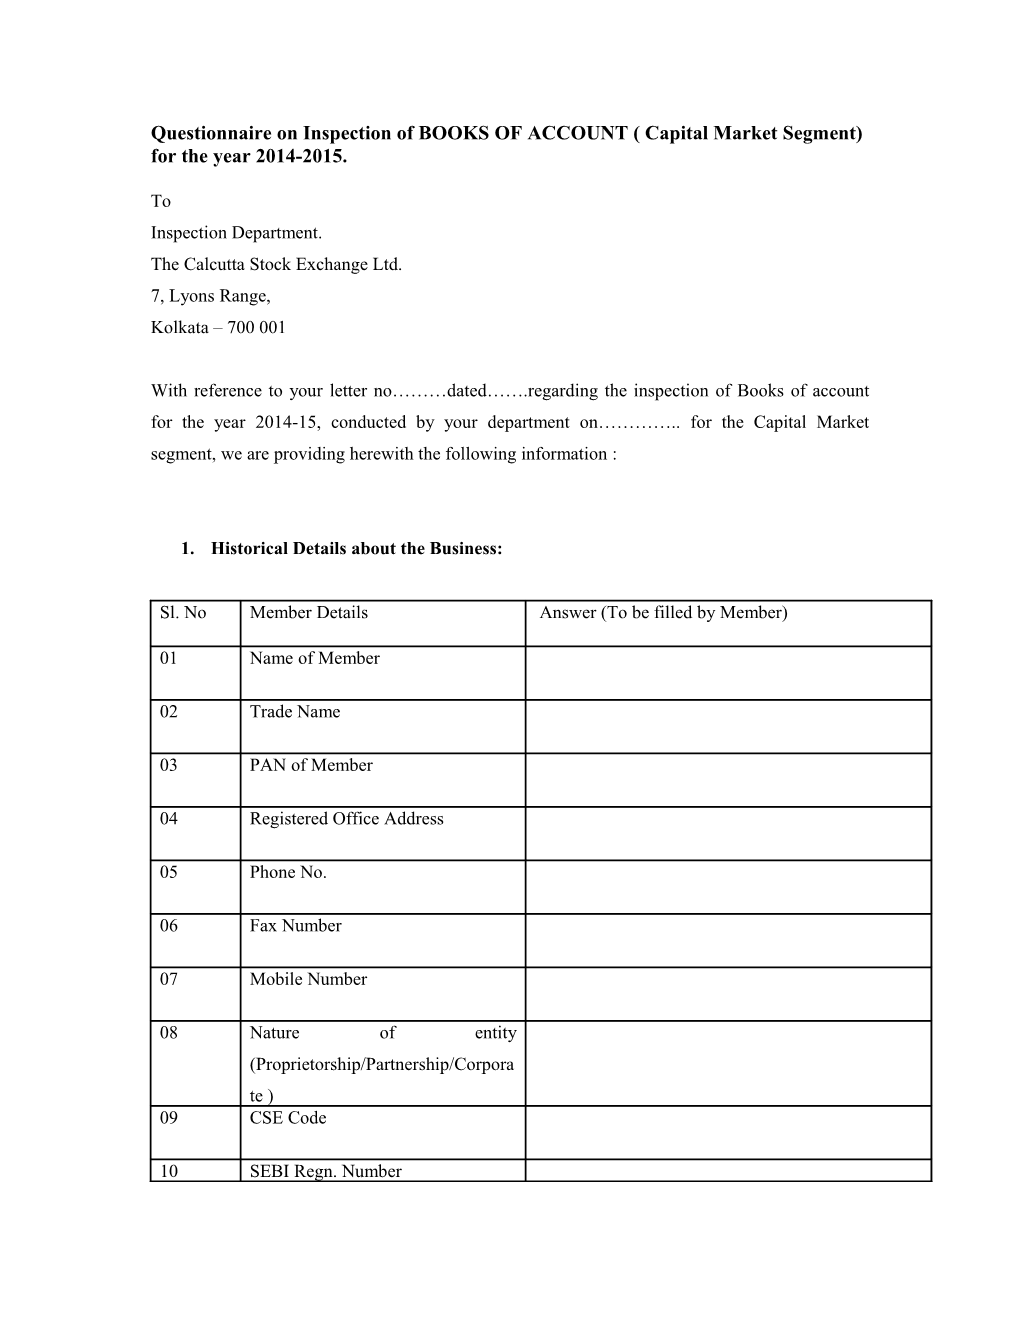 Questionnaire on Inspection of BOOKS of ACCOUNT ( Capital Market Segment) for the Year 2013-2014